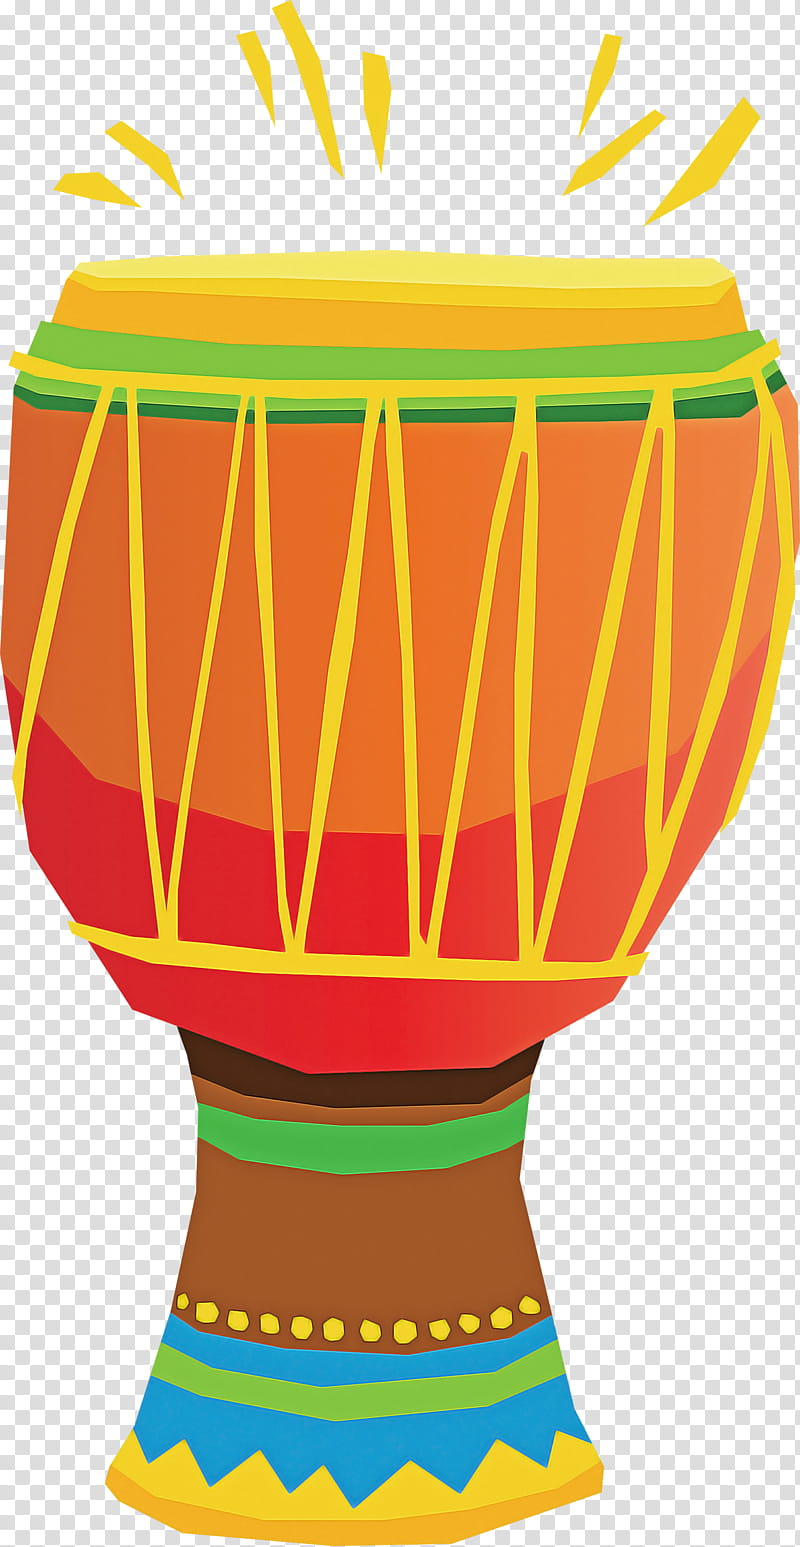 Carnaval Carnival Brazilian Carnival, Hand Drum, Percussion, Tomtom Drum, Drum Kit, Guitar, Bass Drum, Tambourine transparent background PNG clipart